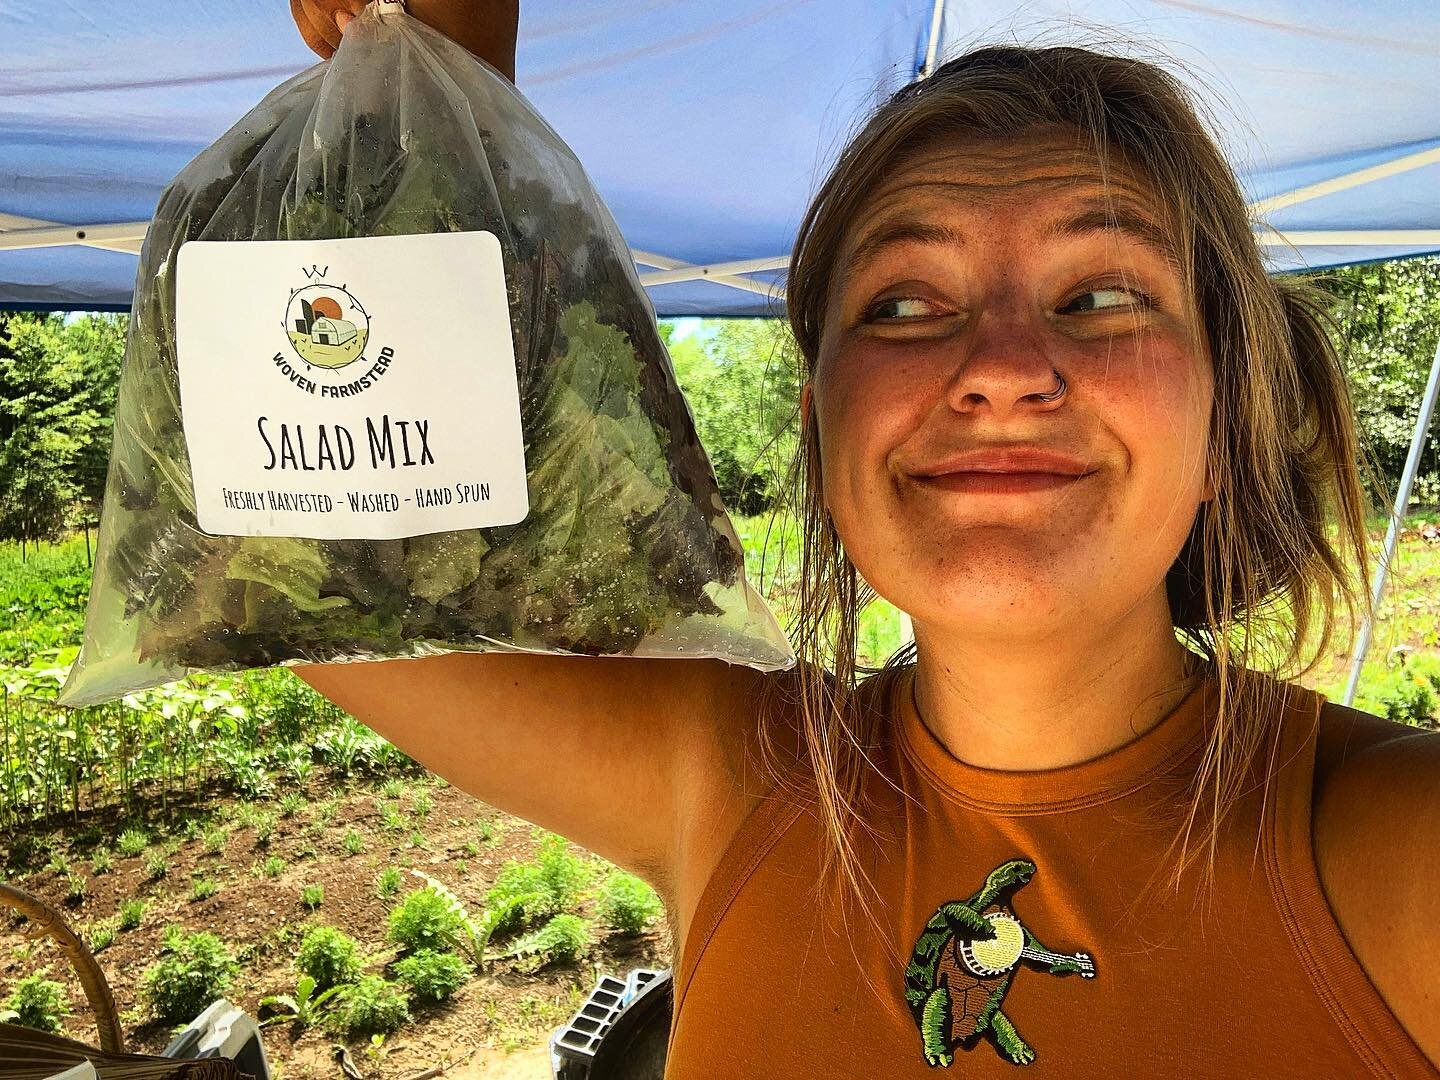 Soooooo much salad mix headed to market tomorrow! And SO many other veggies to make your salad complete.

Stop by Montague Market from 9- noon thirty to catch me slingin some farm fresh goooooods

OR

Stop by and say hi to @vstarkphotos at @sweetwate